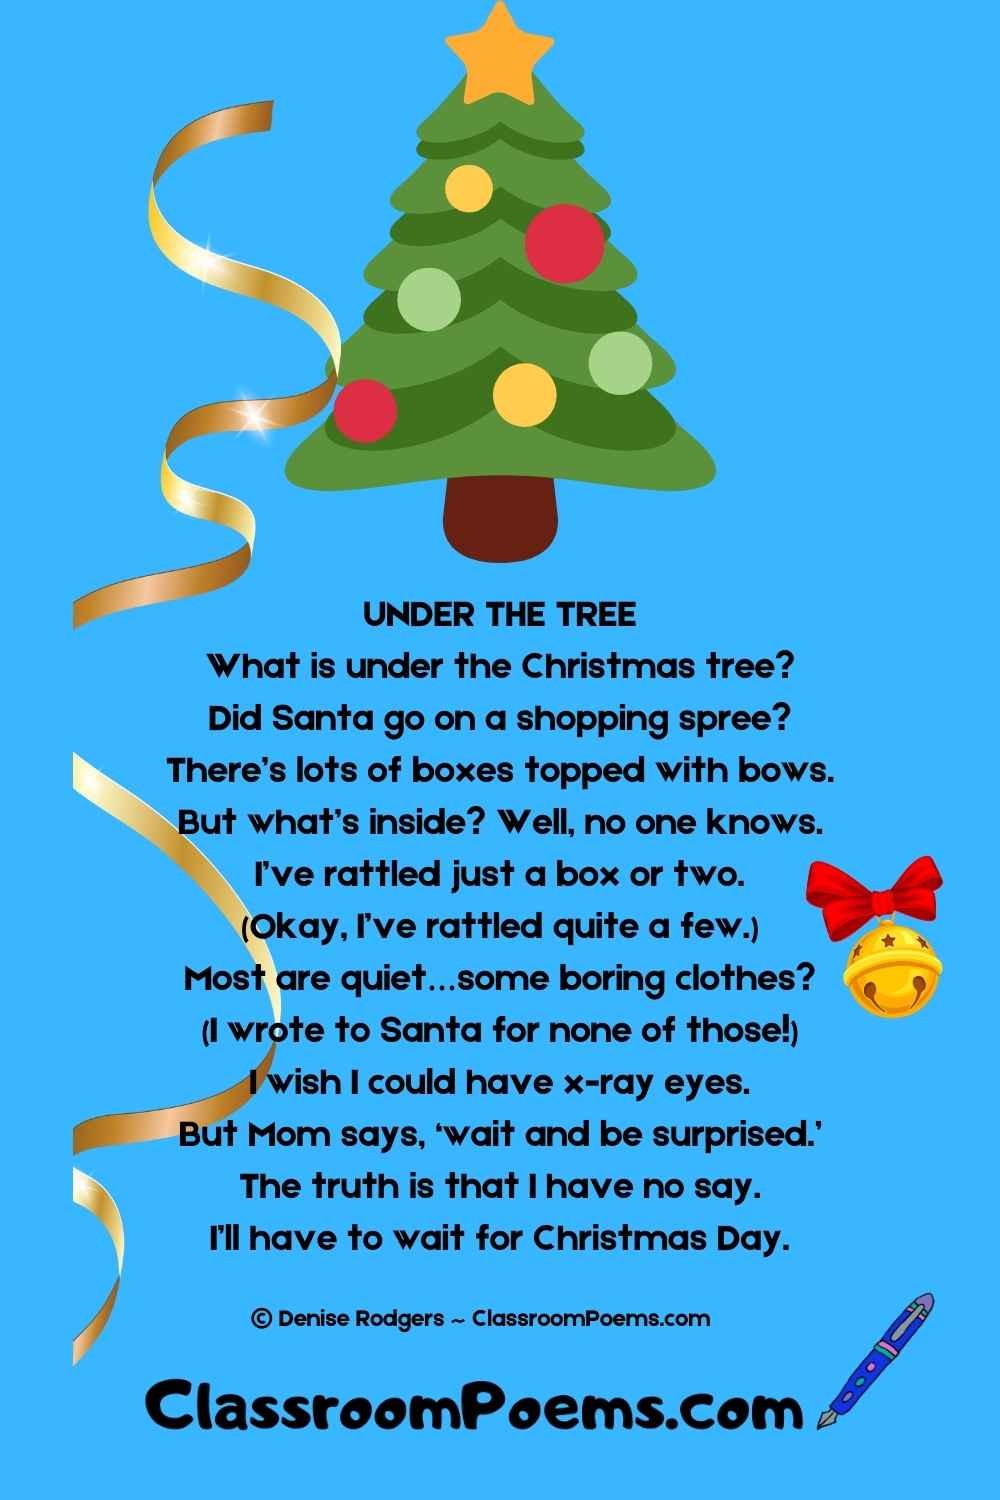 A Christmas Poem for Kids featured on the Poem of the Week page, by Denise Rodgers on ClassroomPoems.com.